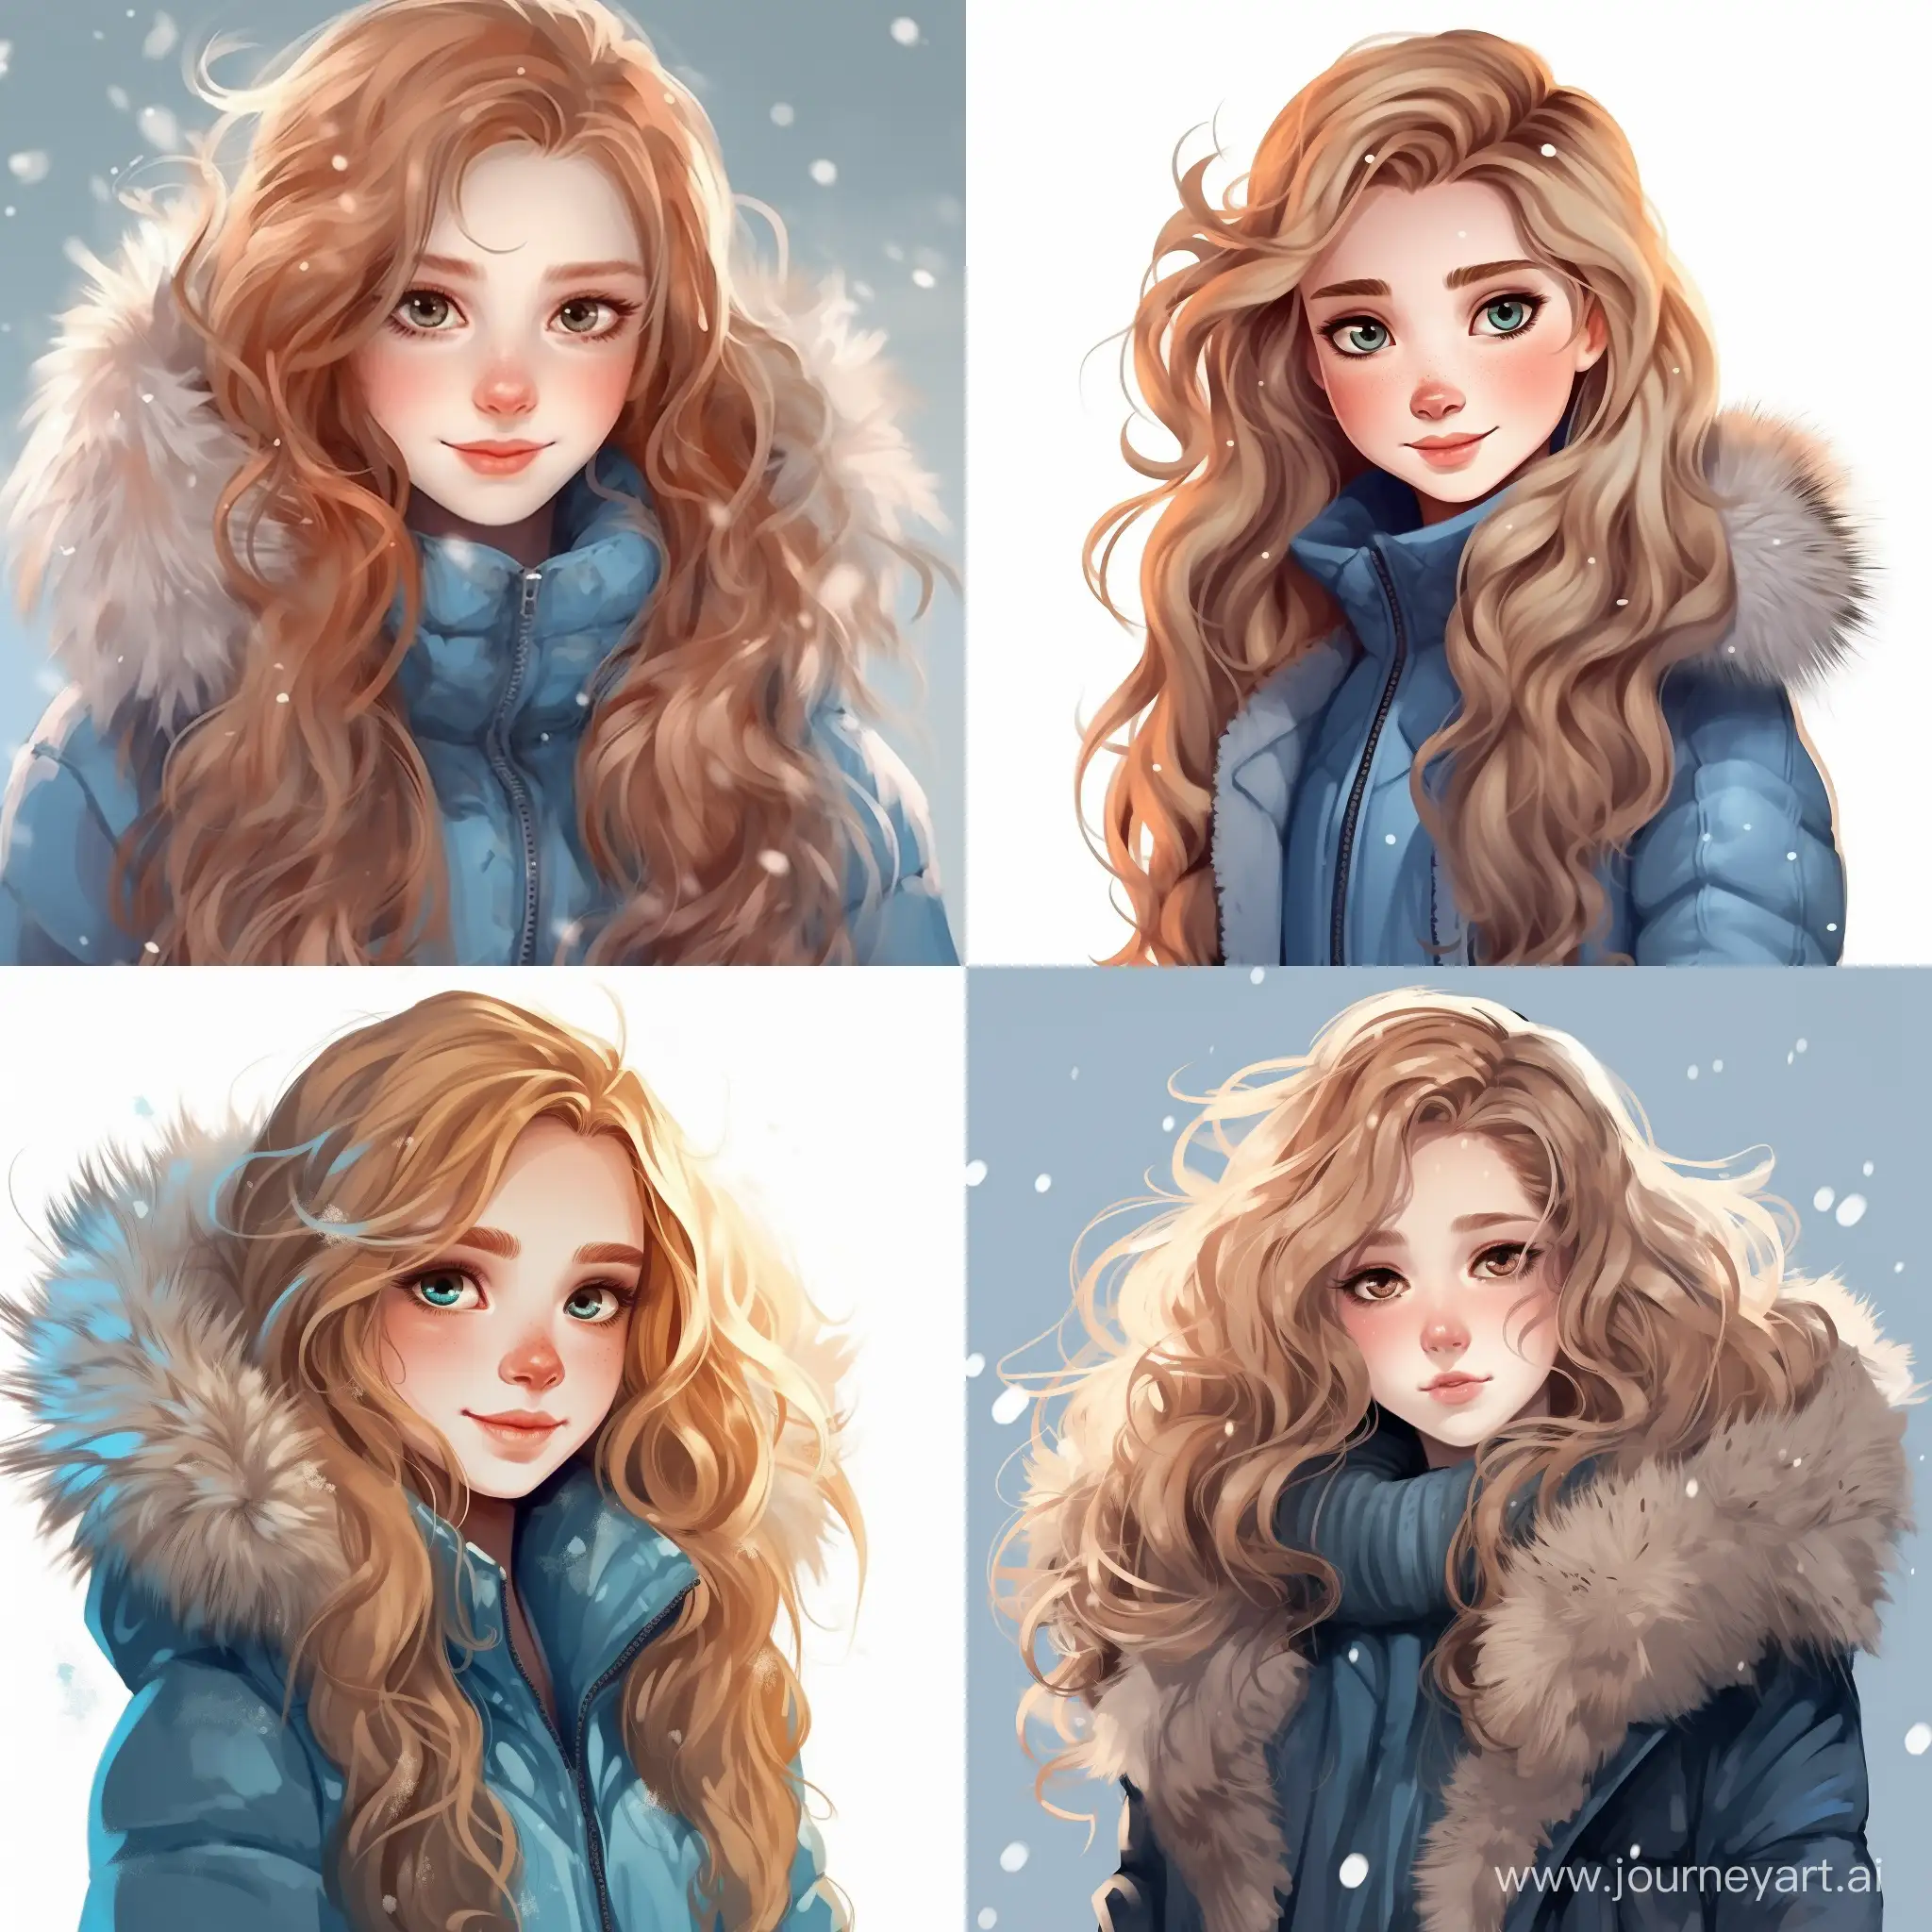 beautiful girl, straight golden hair, gray-blue eyes, pale skin, teenager, 15 years old, nice, cozy, cute, in a blue fur coat, winter, snow, high quality, high detail, cartoon art